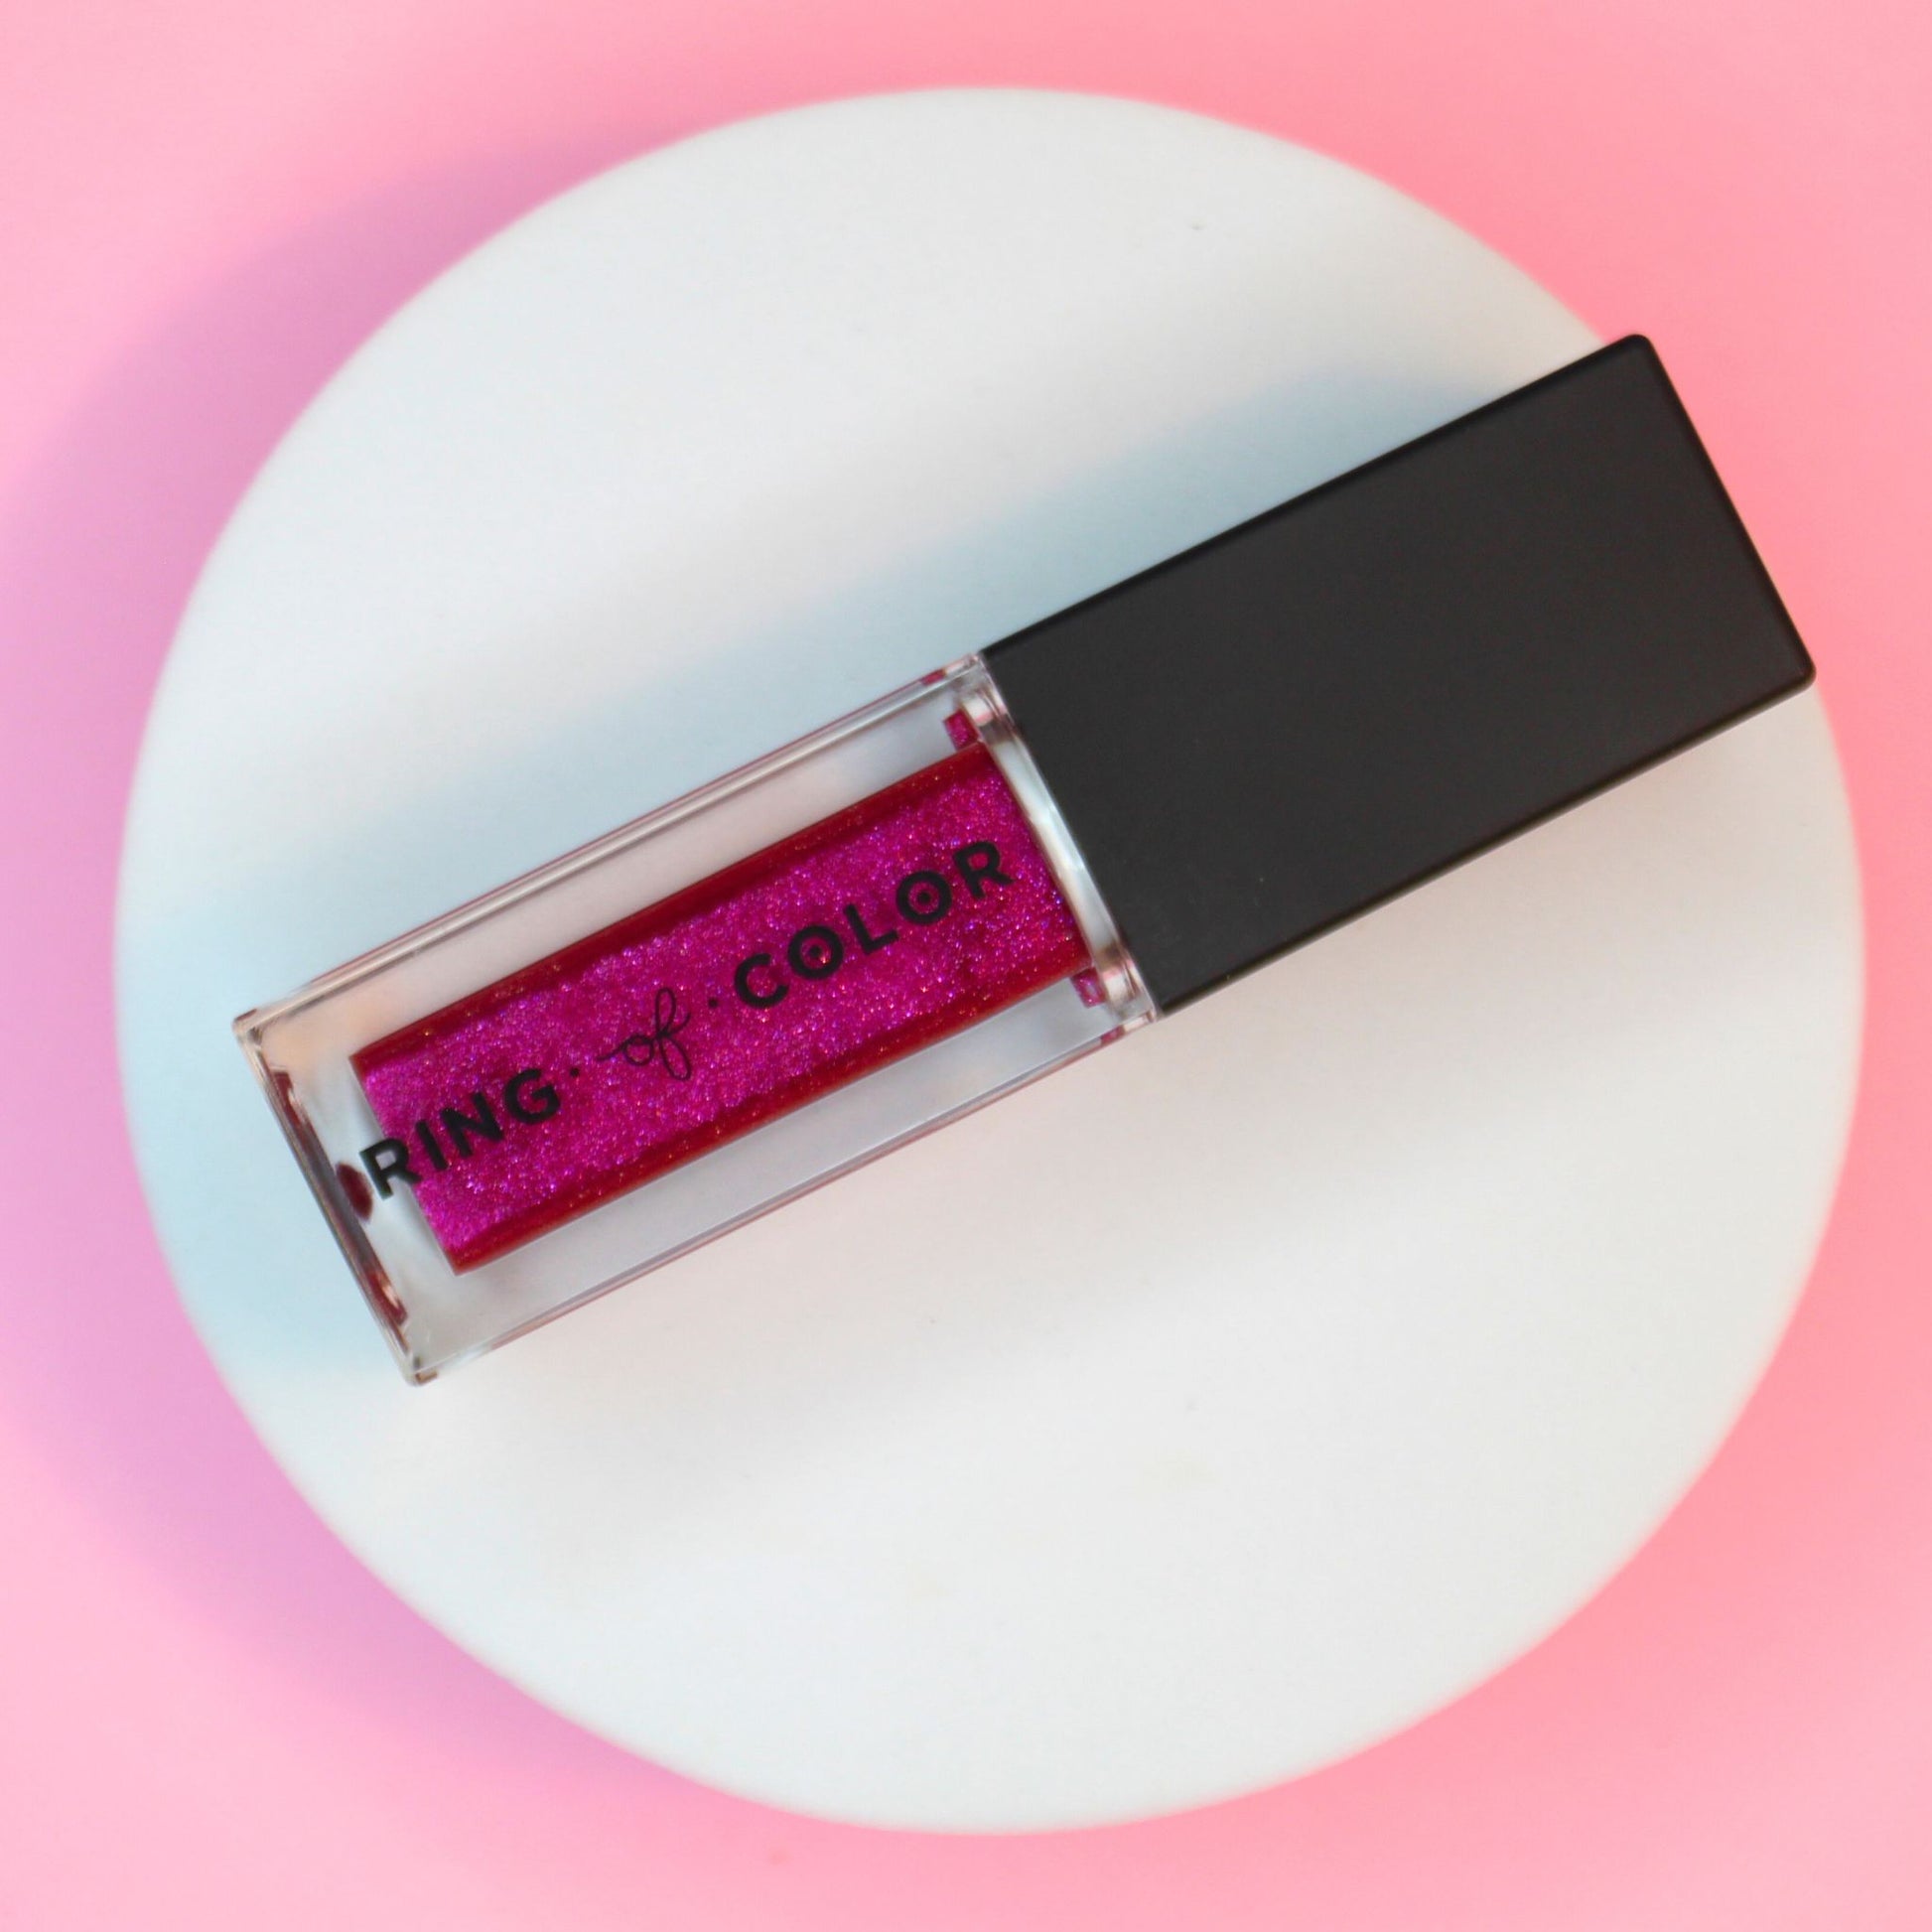 deep shimmer pink berry lip oil in clear vial with black cap